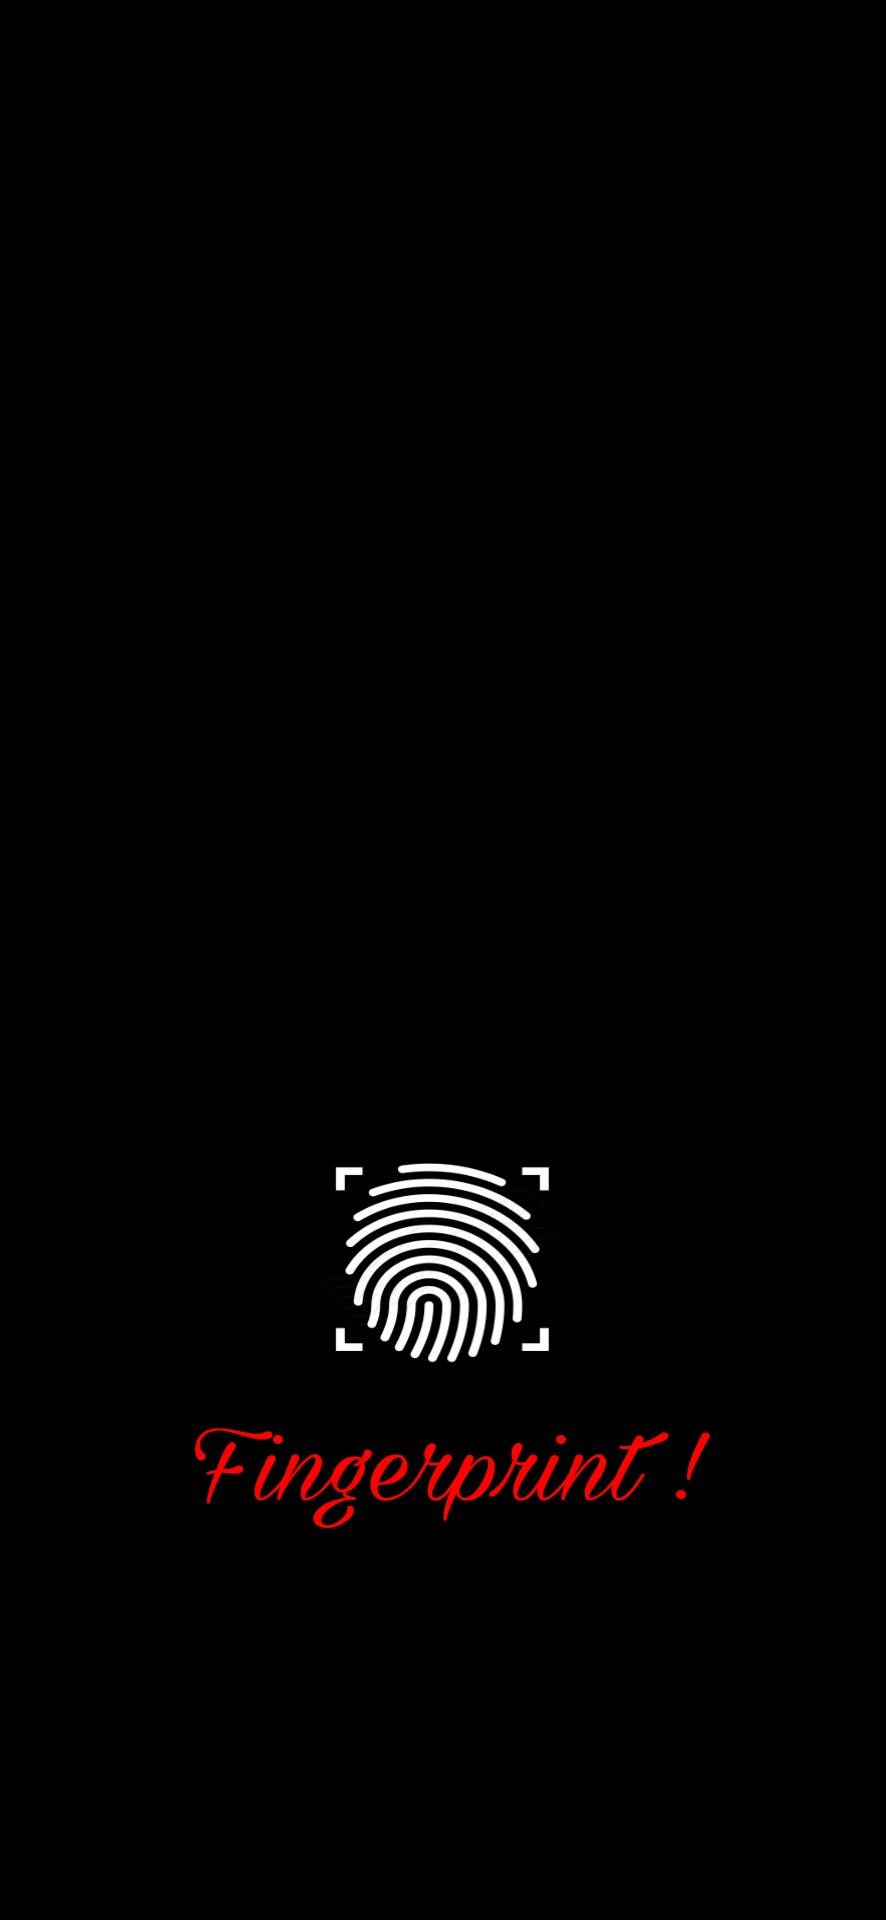 Lock screen - Fingerprint support APK for Android - Download